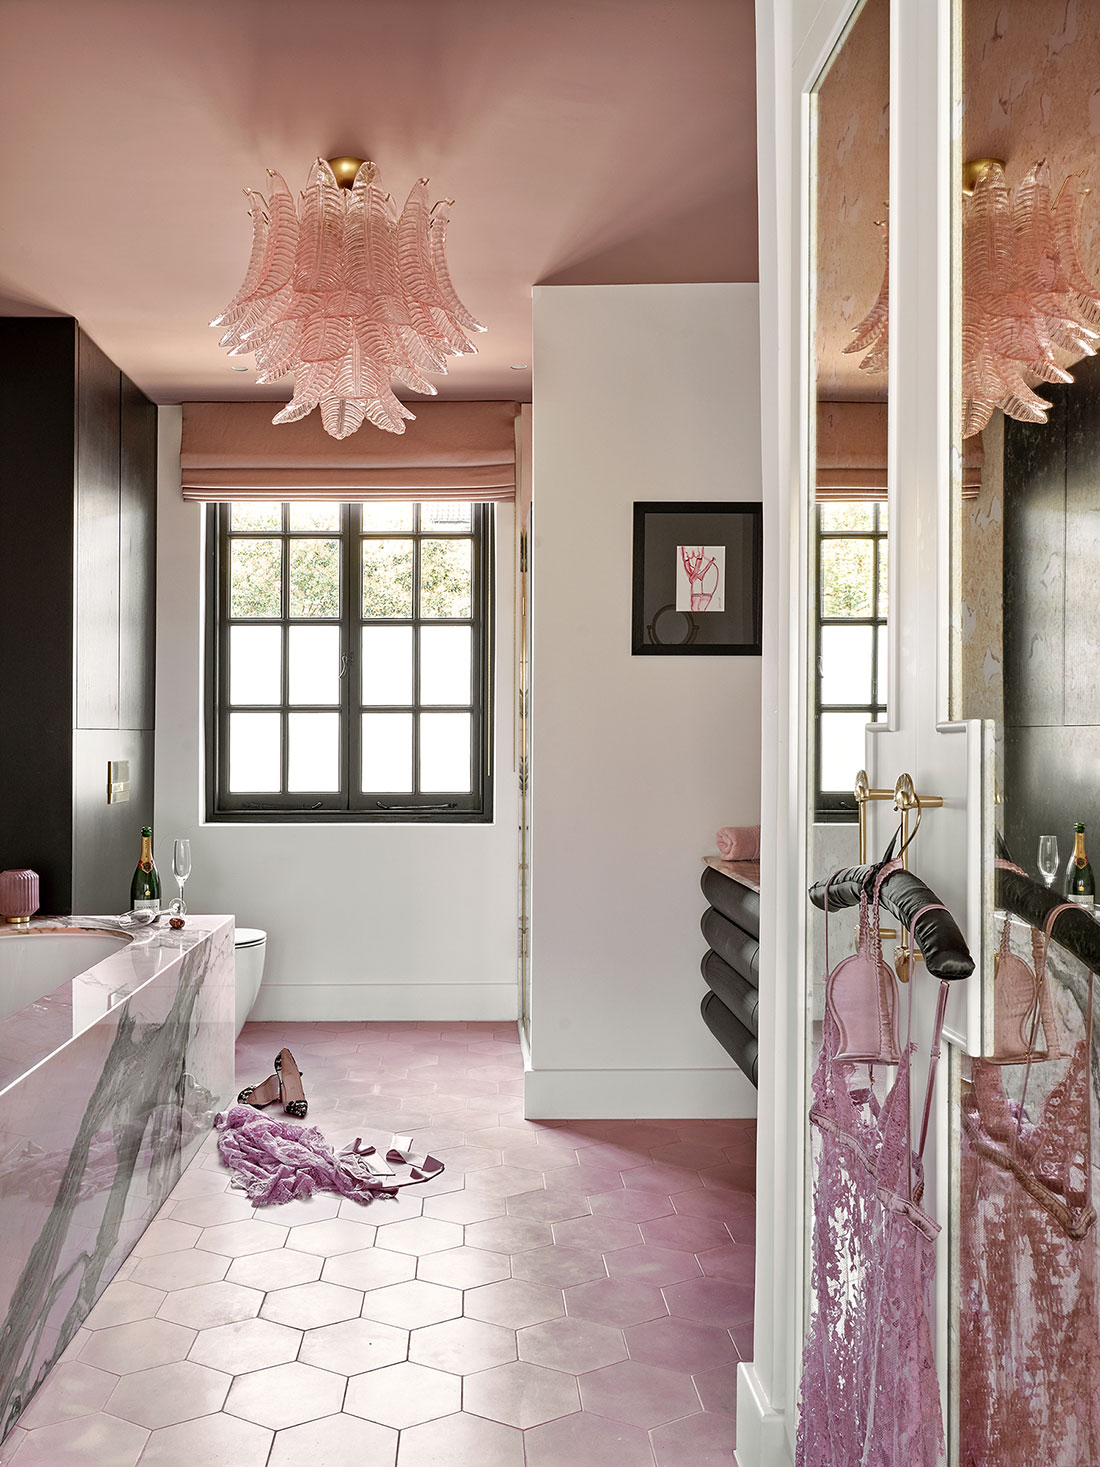 The luxury bathroom from LEIVARS project in St John's Wood featuring pink marble bath